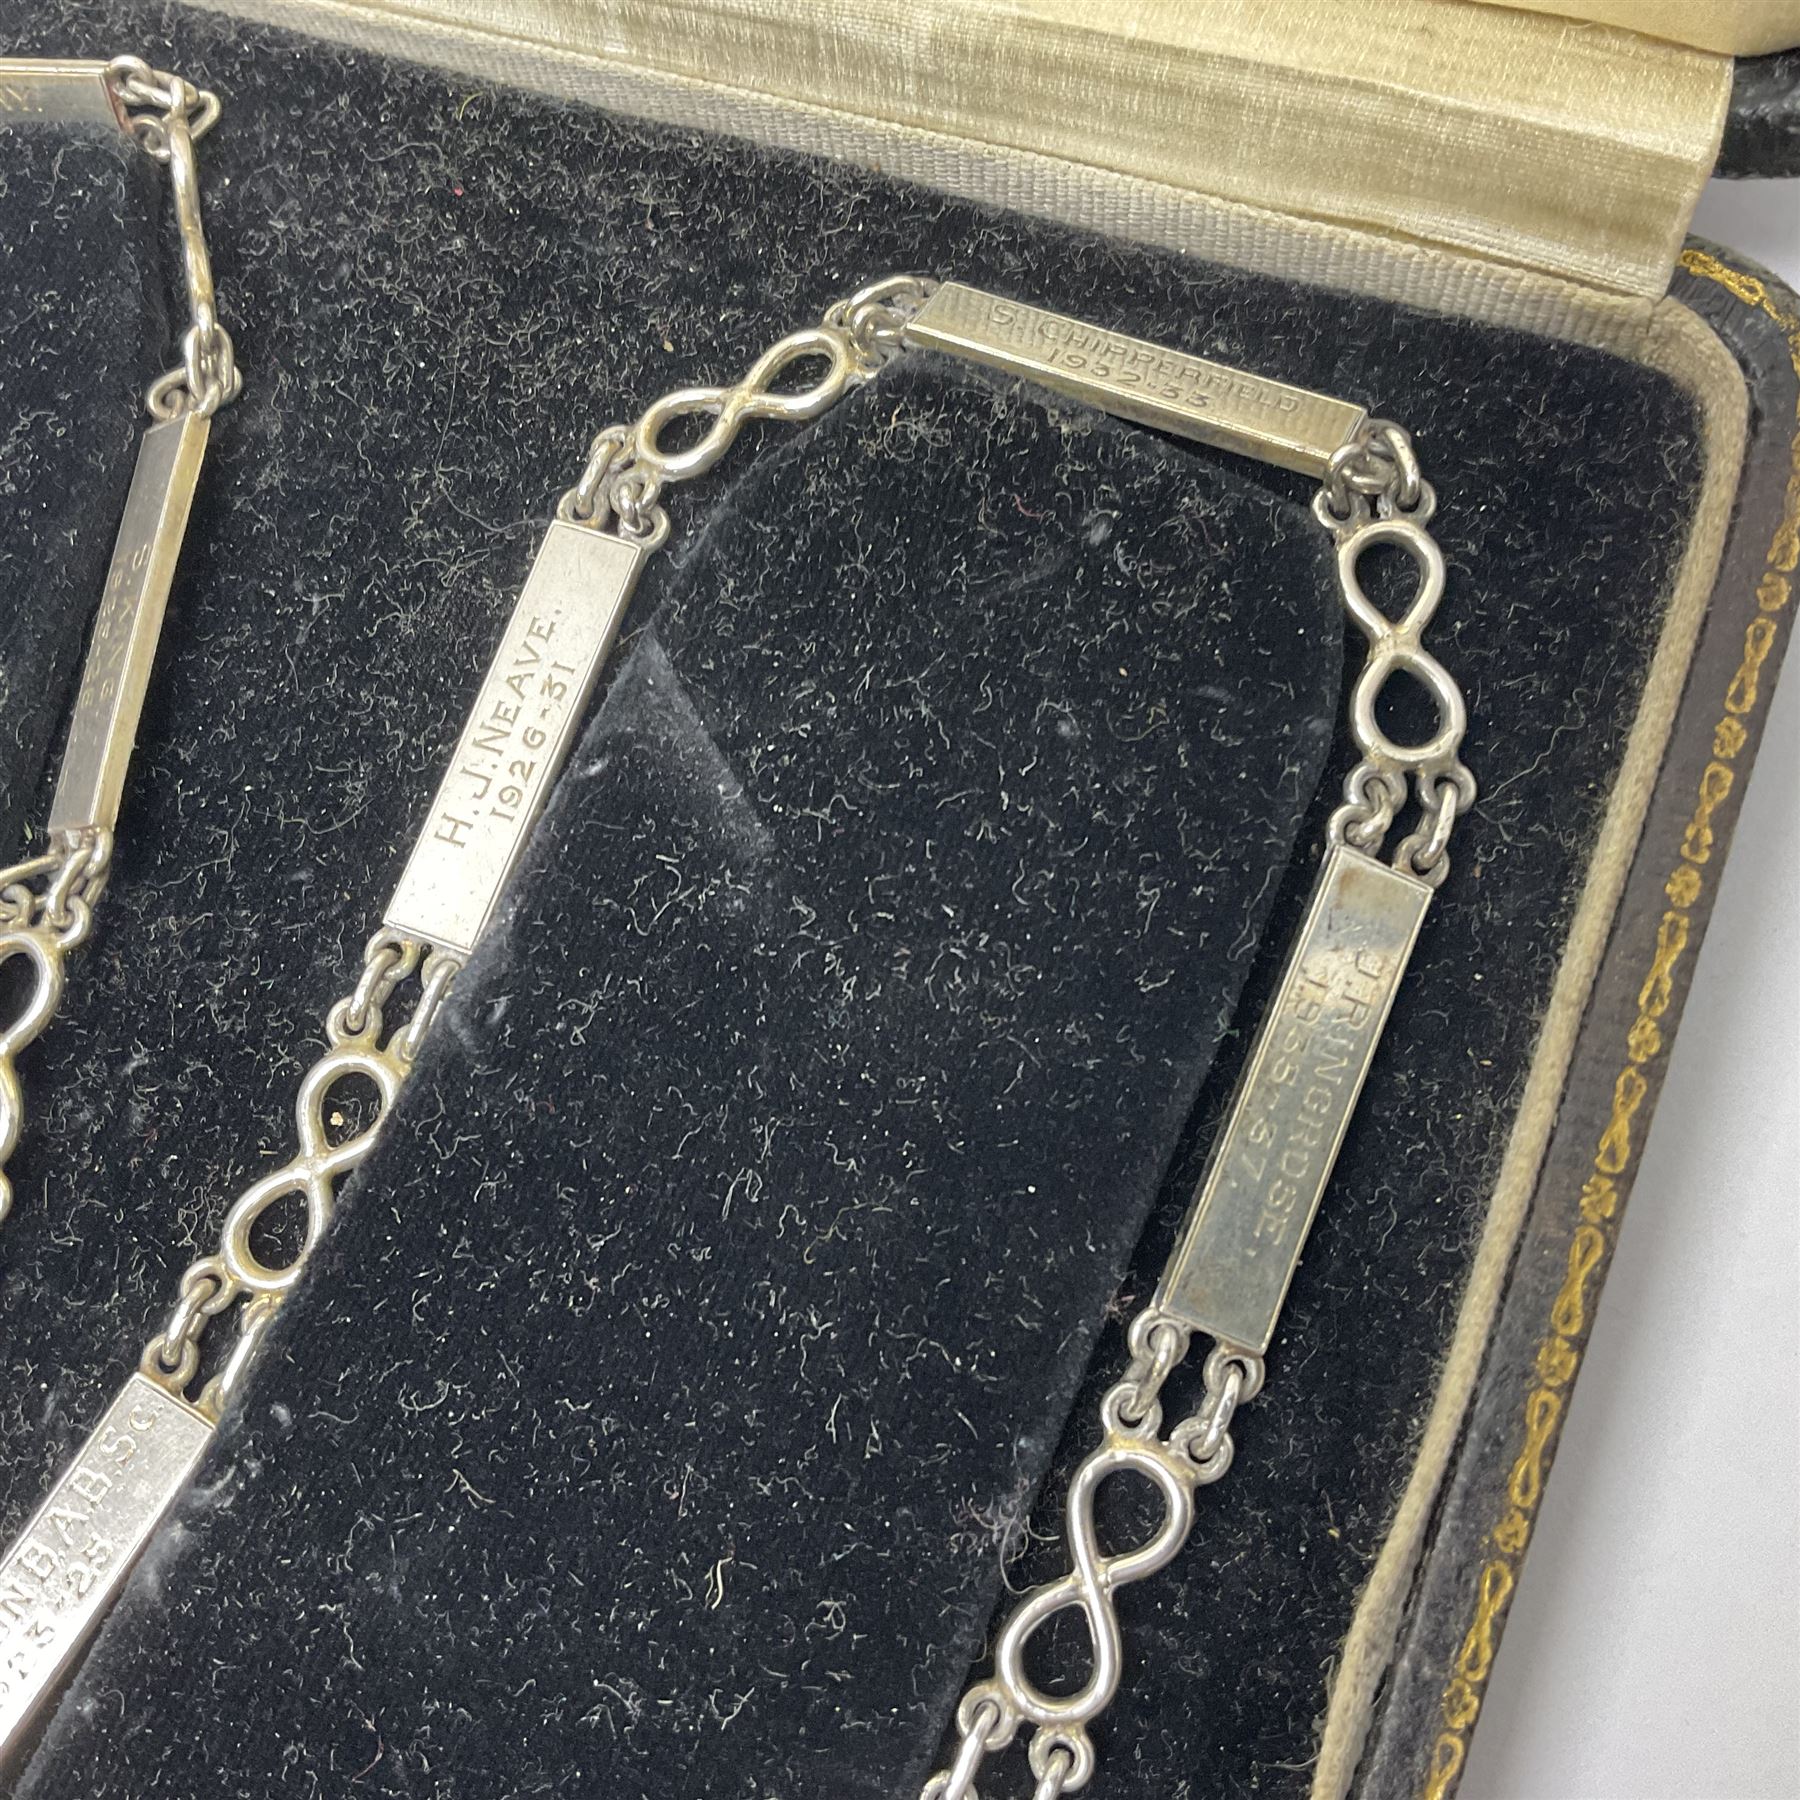 1930s silver chain of office - Image 5 of 12